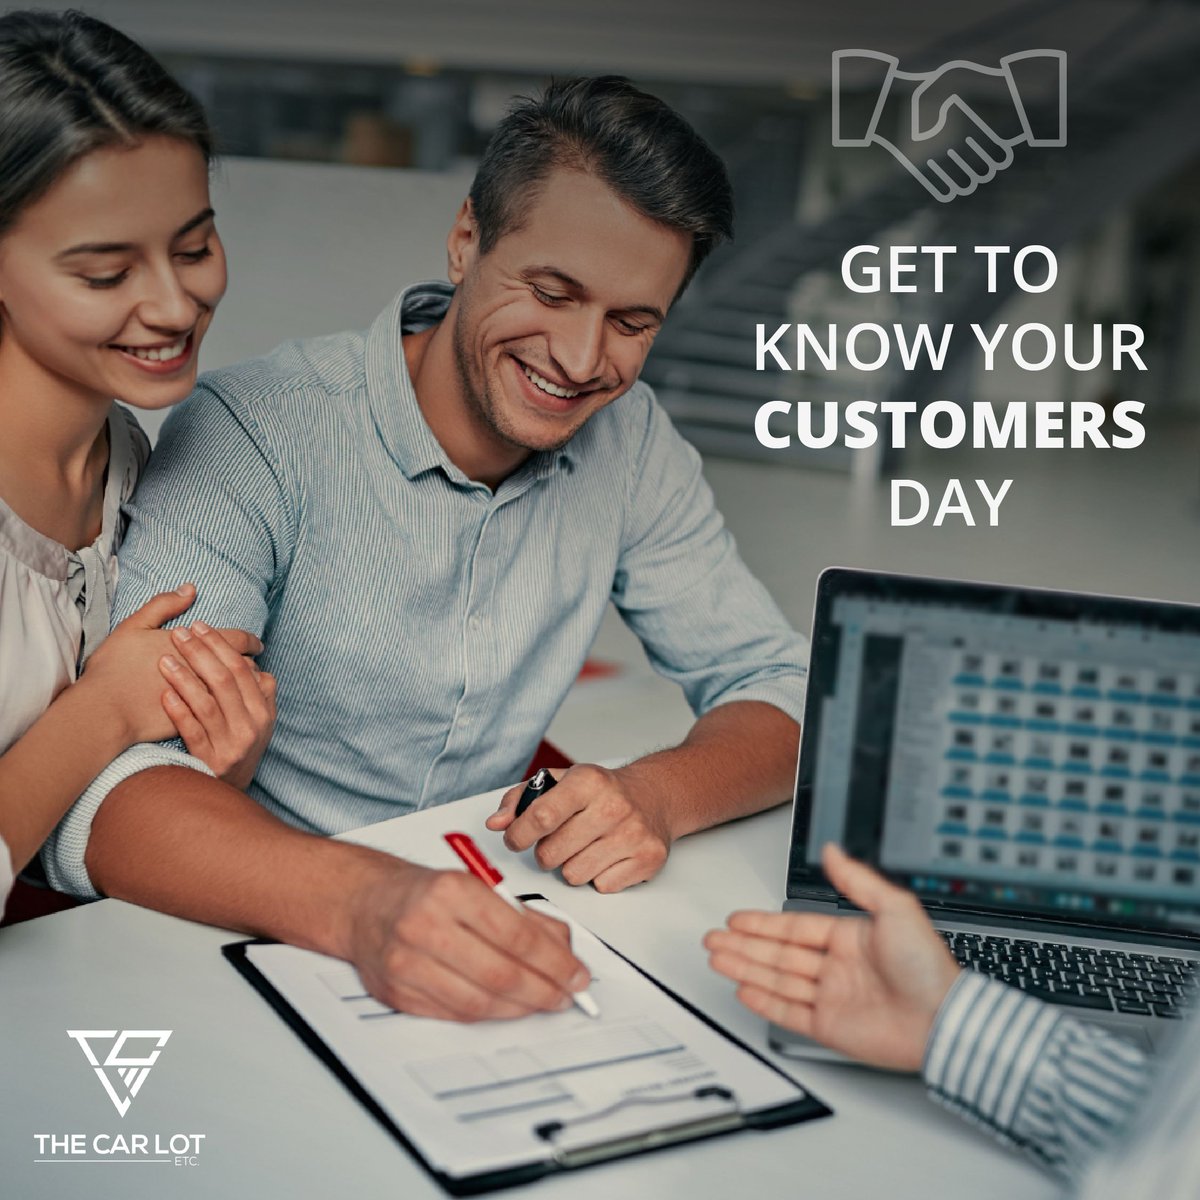 🚗🤝 Today is Get to Know Your Customers Day! At The Car Lot, every day is about building connections. Today, we want to hear about your amazing experiences working with us!

#GetToKnowYourCustomersDay #CustomerConnection #TheCarLotSudbury